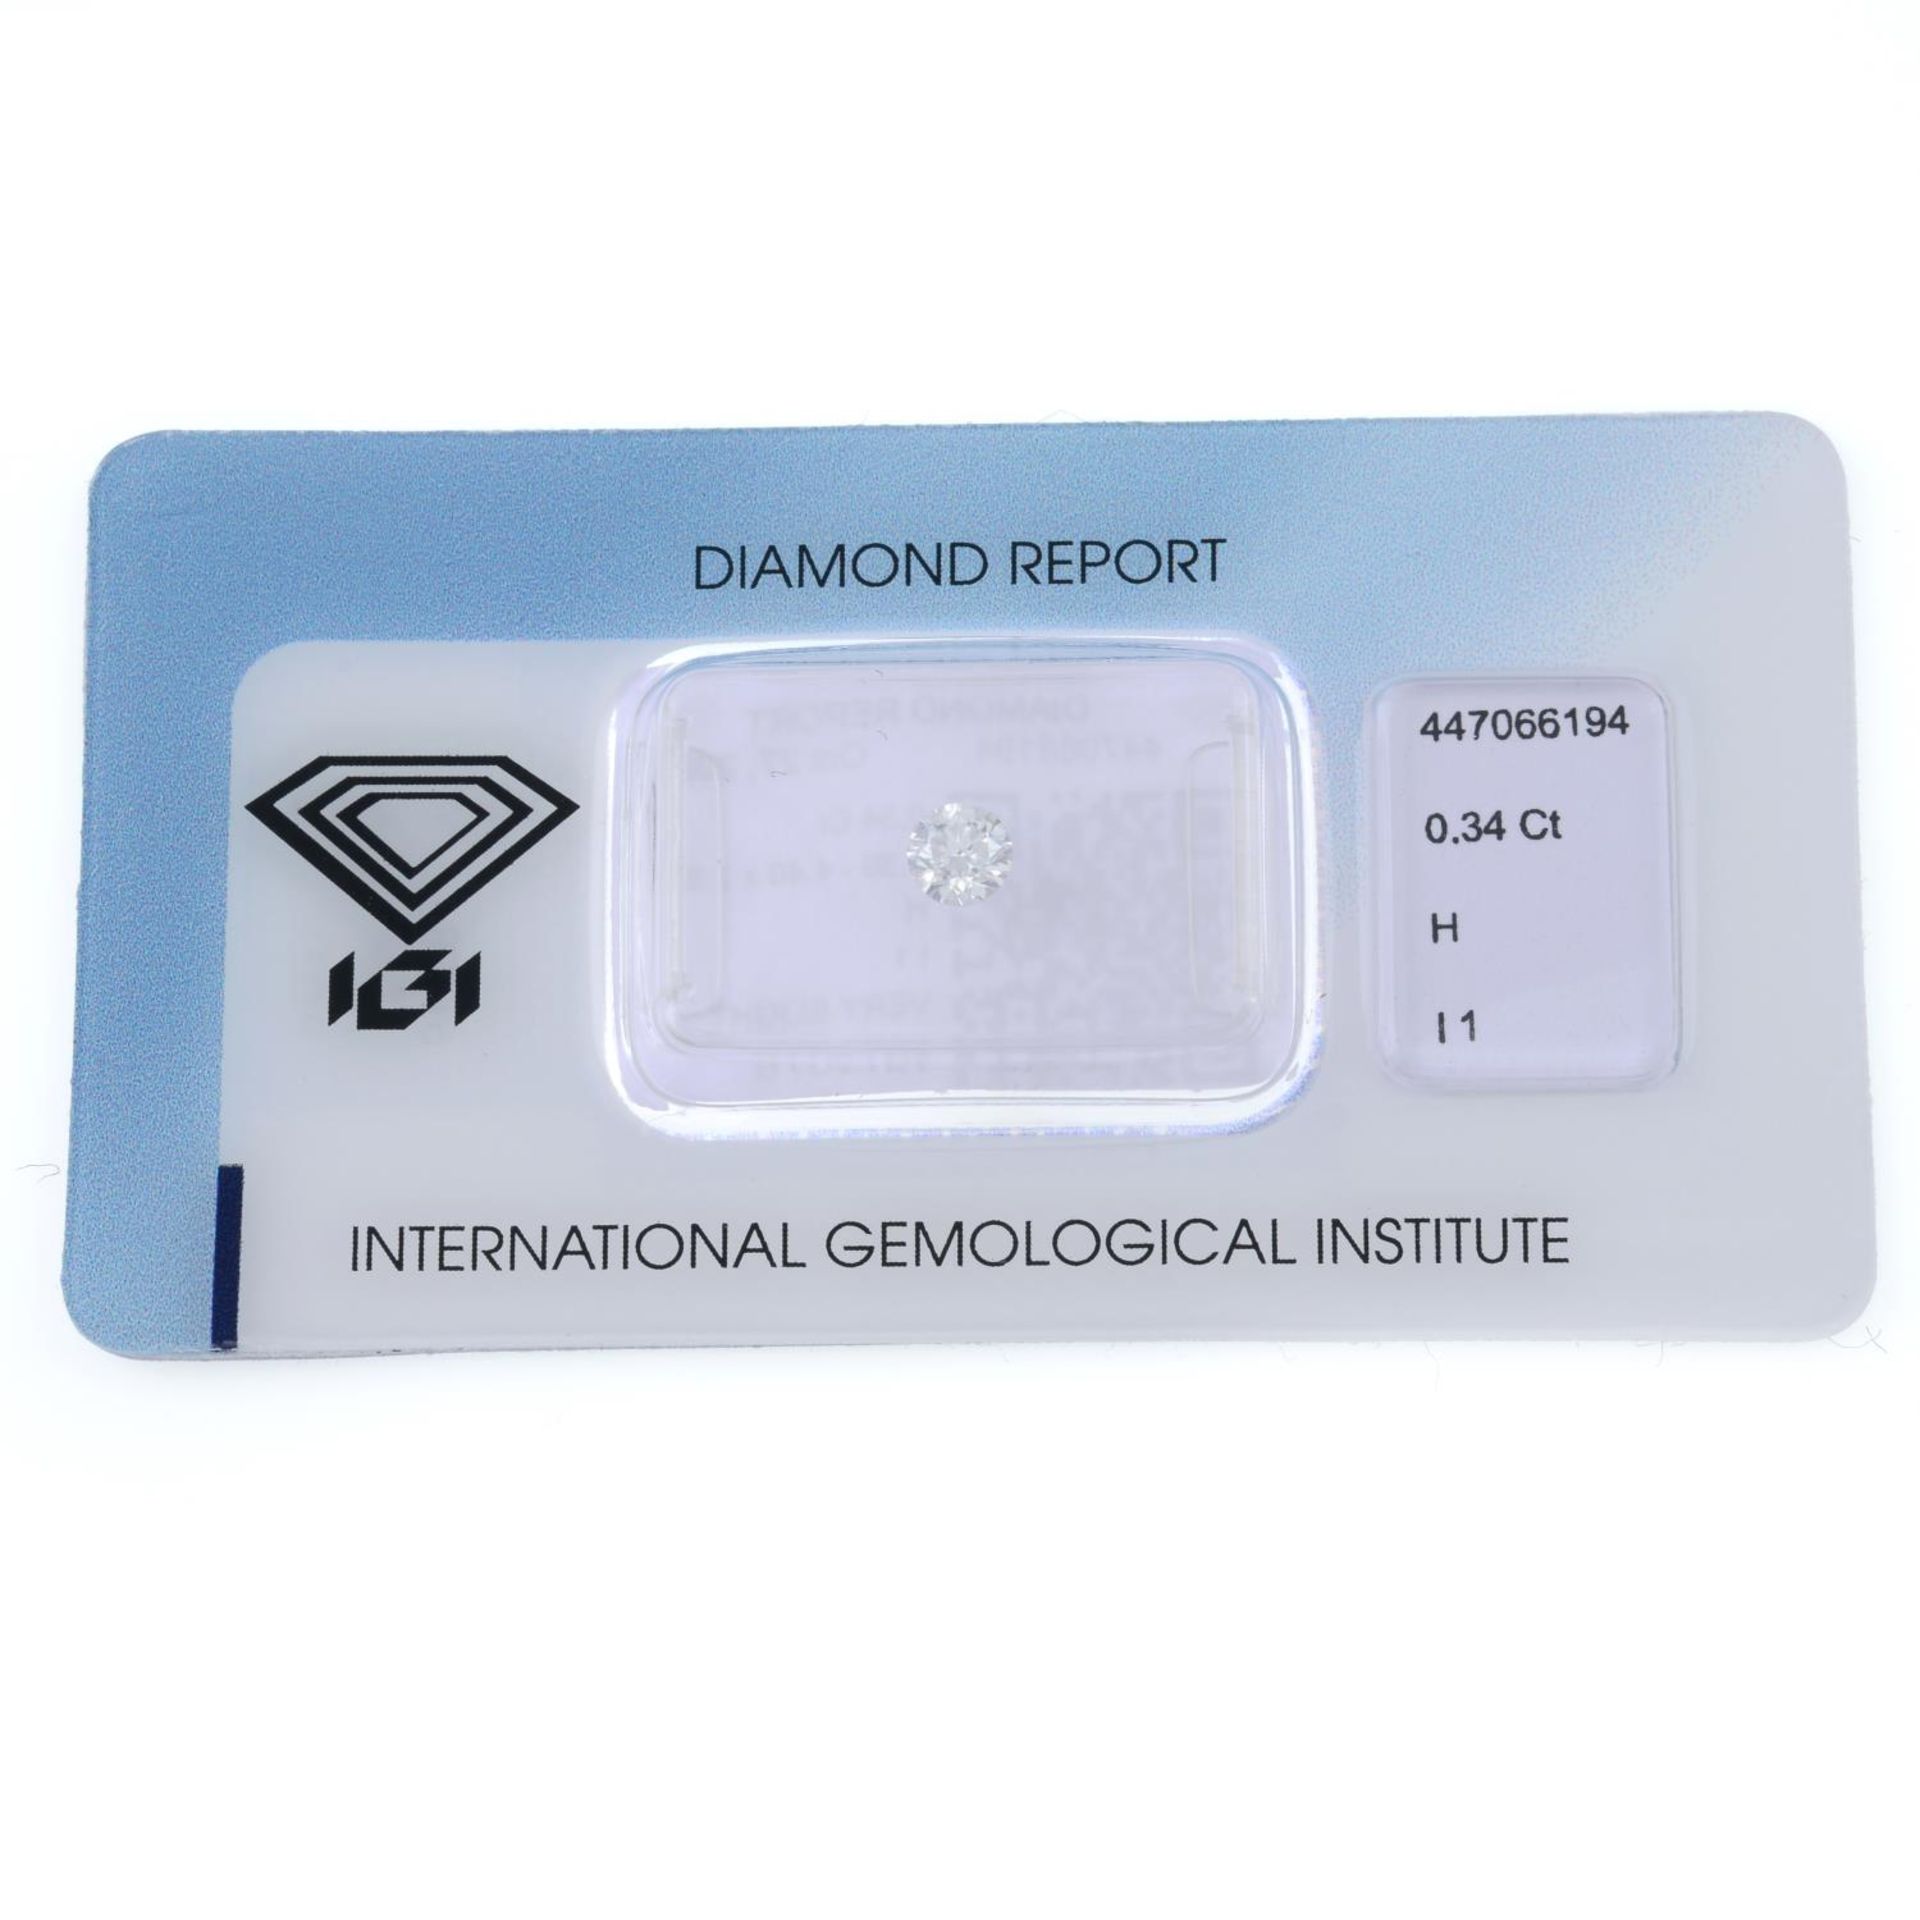 A brilliant cut diamond, weighing 0.34ct, measuring 4.36 by 4.4 by 2.8mms. - Image 2 of 4